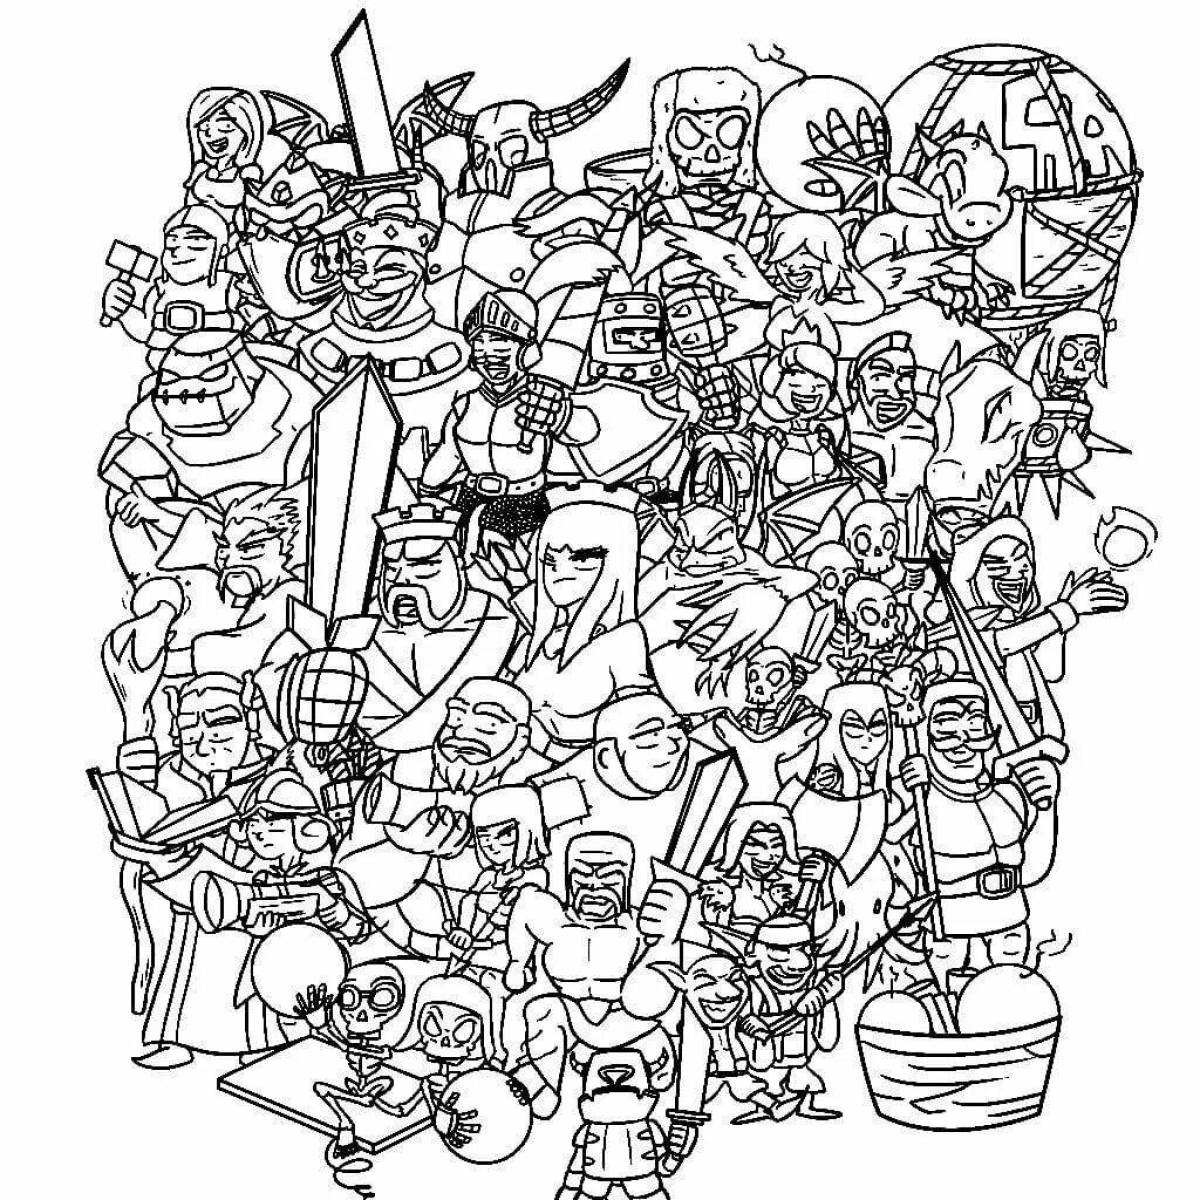 Witty clash royale coloring book